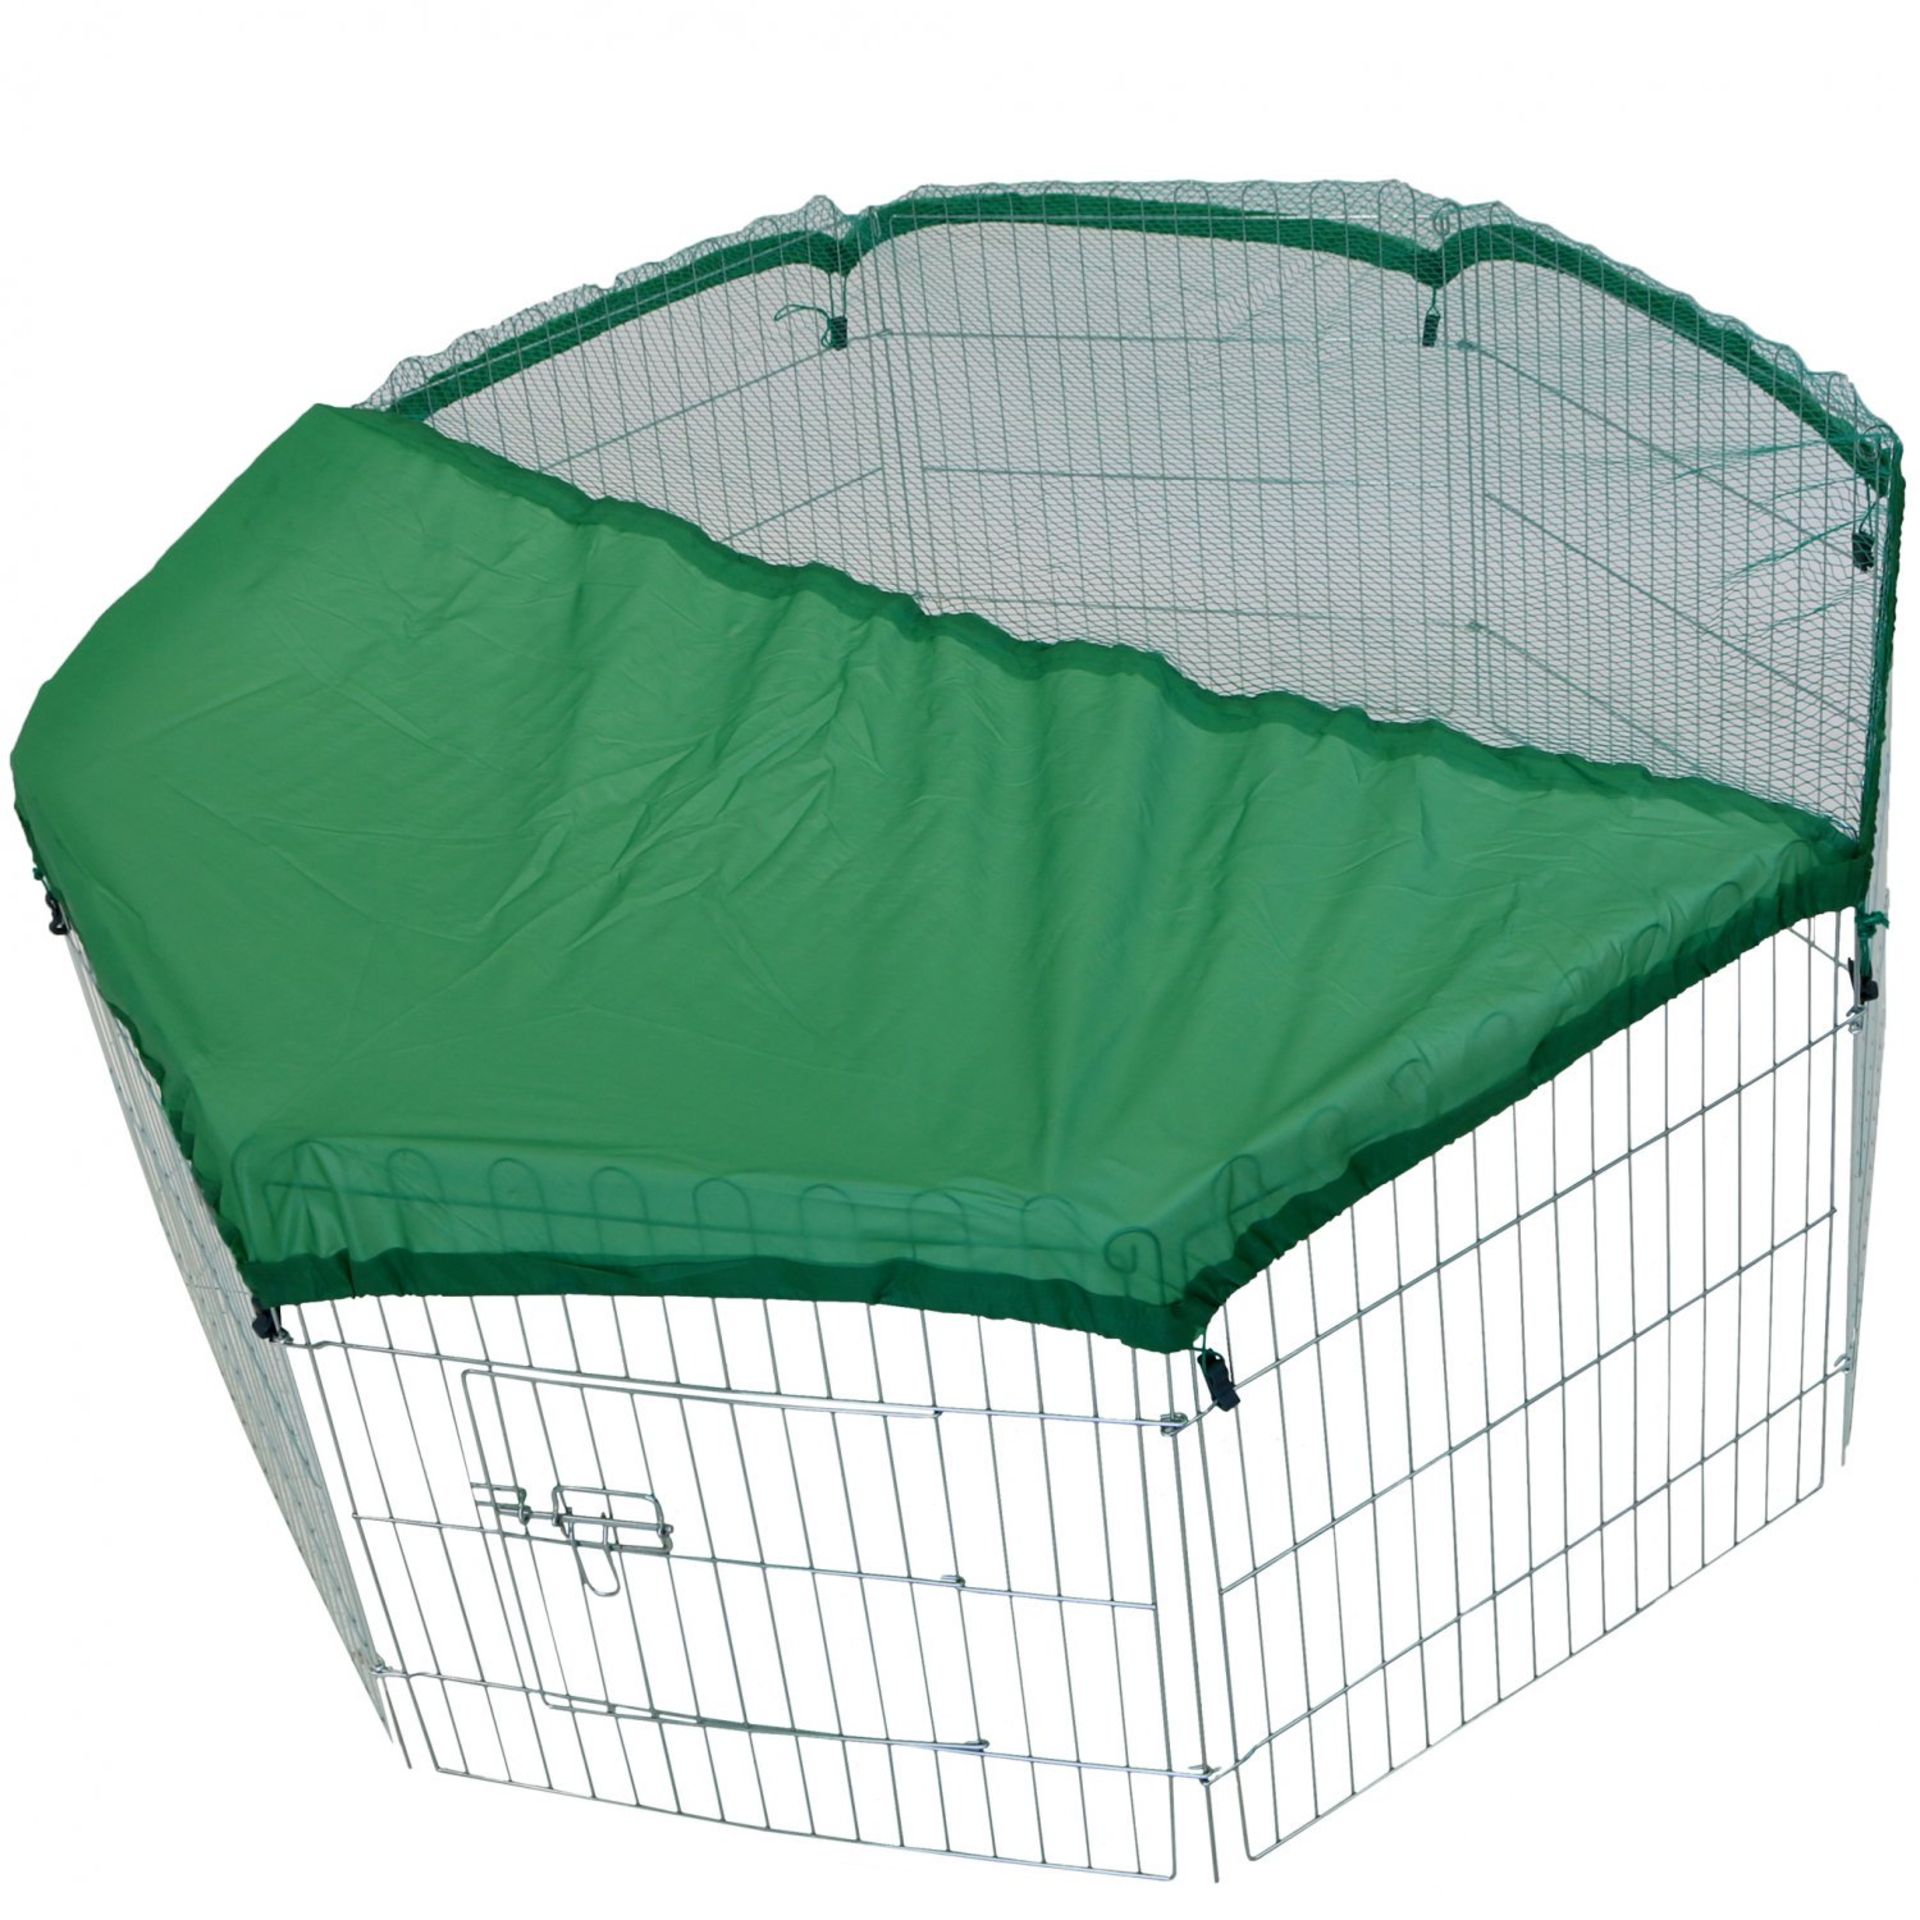 (RU285) 8 Panel Outdoor Rabbit Play Pen Run with Shade Safety Net The outdoor pen is perfect... - Image 2 of 2